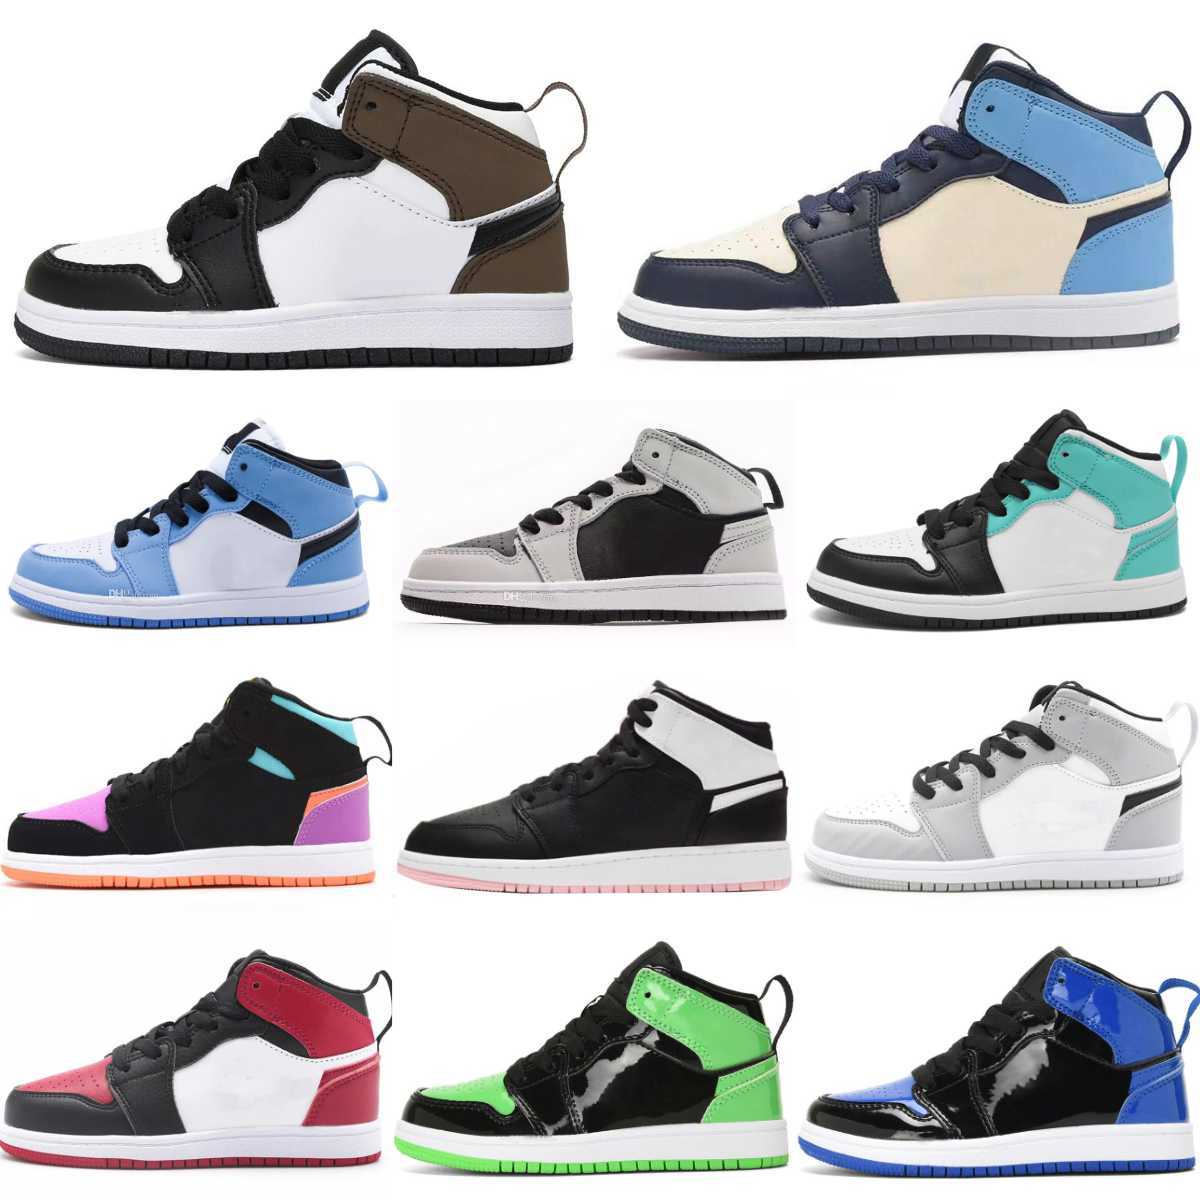 

Jumpman 1 Baby Kids Basketball Shoes Girls Boys BLACK WHITE DARK JORDEN MOCHA Obsidian Chicago Retro Candy Bred Pine Green Fearless Hyper Royal Trainers Sneakers, Please contact us